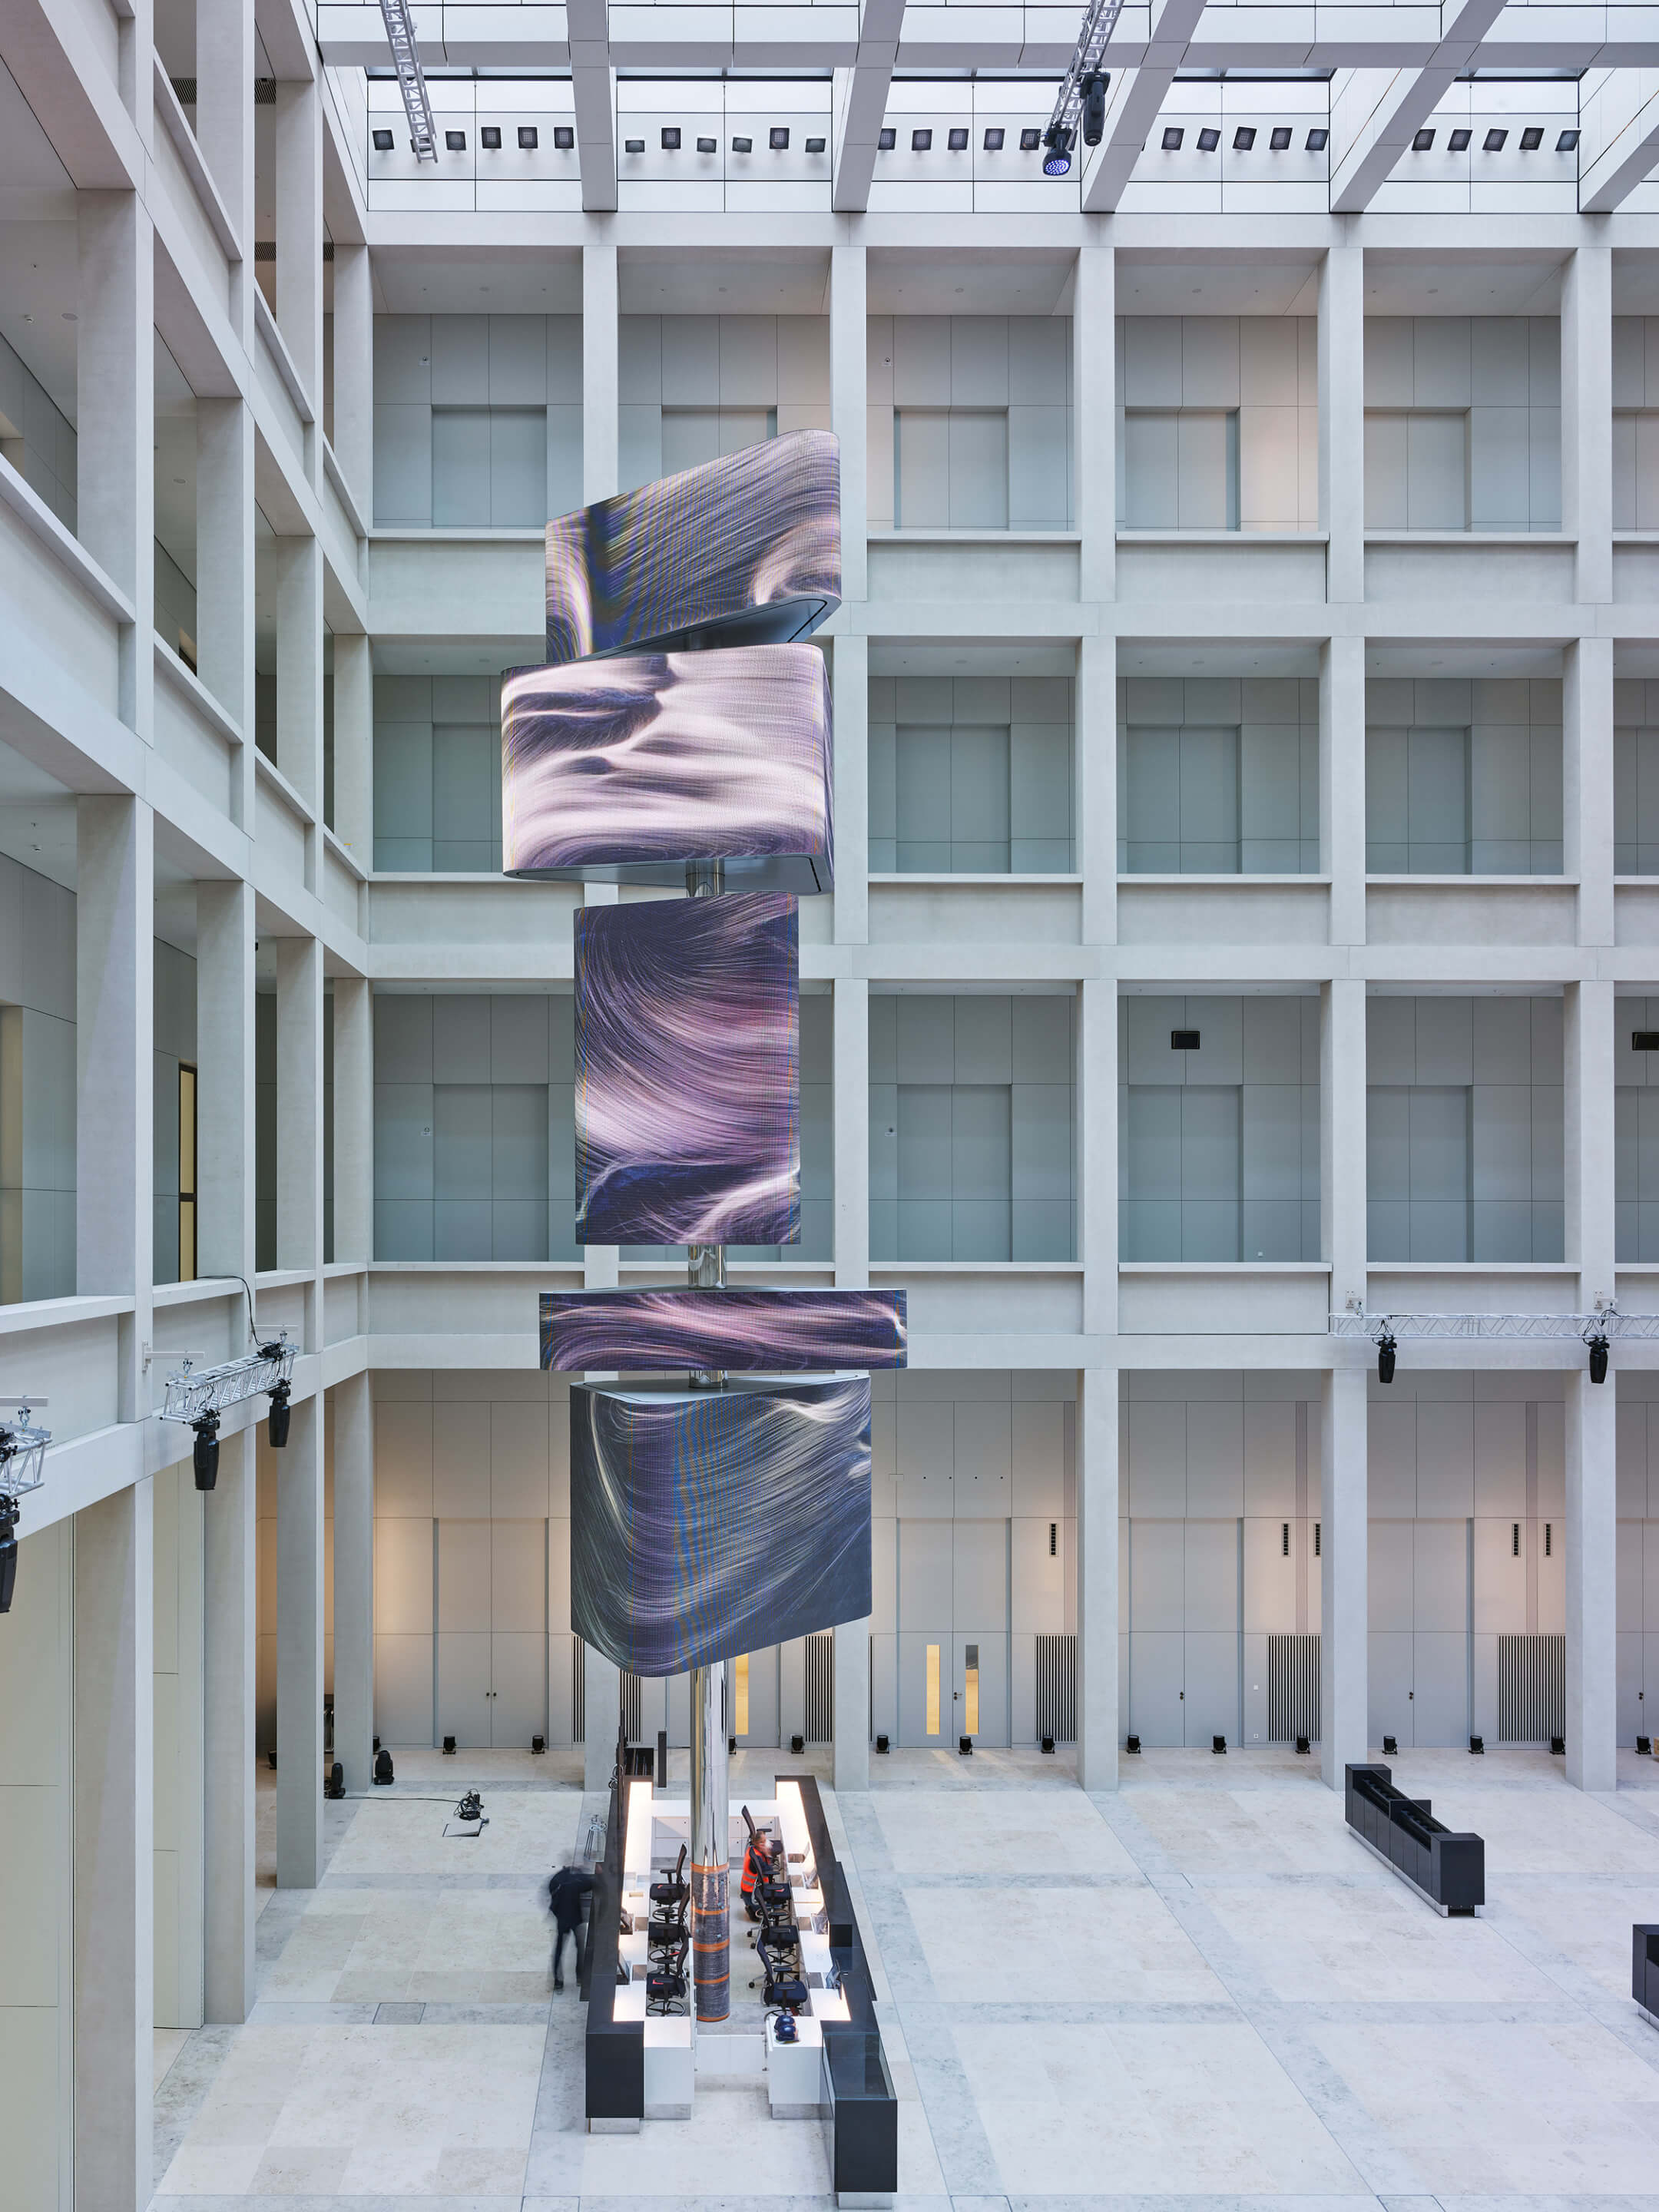 Installation view of a multistory arrangement of purple banners against a modernist gallery foyer